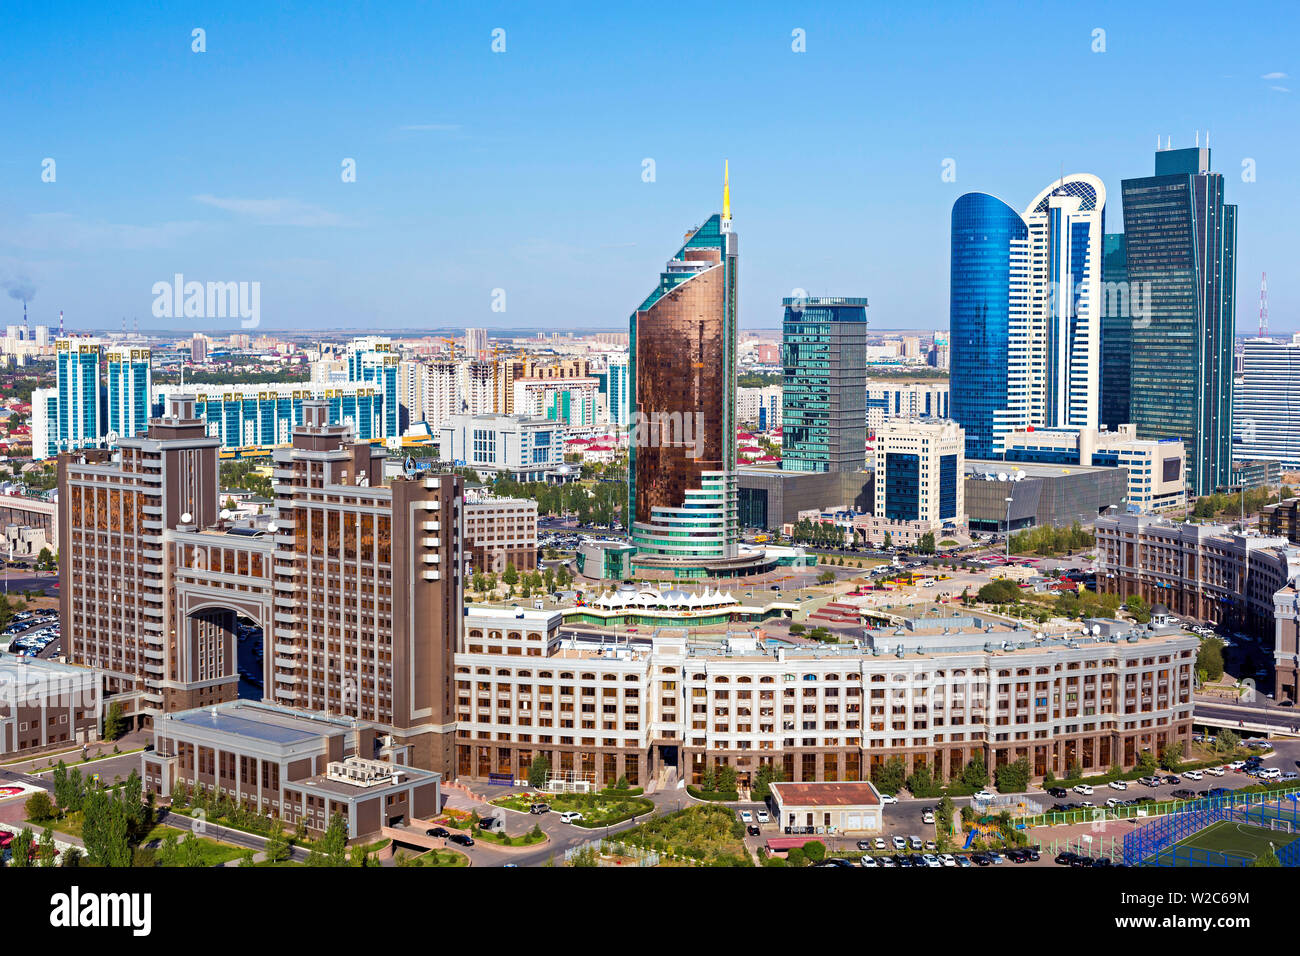 Central Asia, Kazakhstan, Astana, the city center and central business district Stock Photo